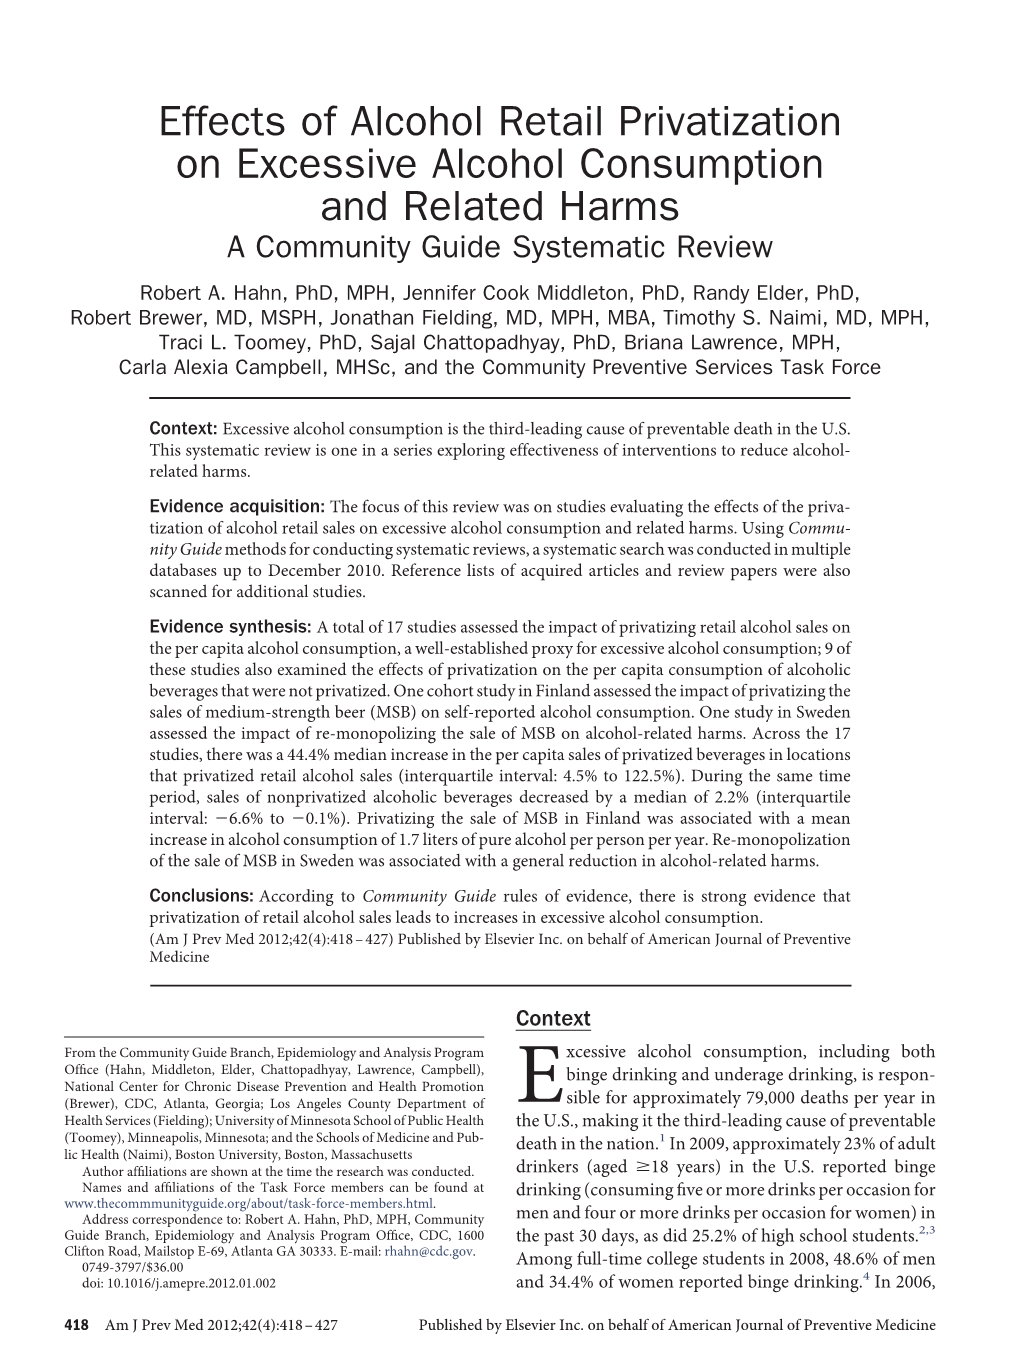 Effects of Alcohol Retail Privatization on Excessive Alcohol Consumption and Related Harms a Community Guide Systematic Review Robert A